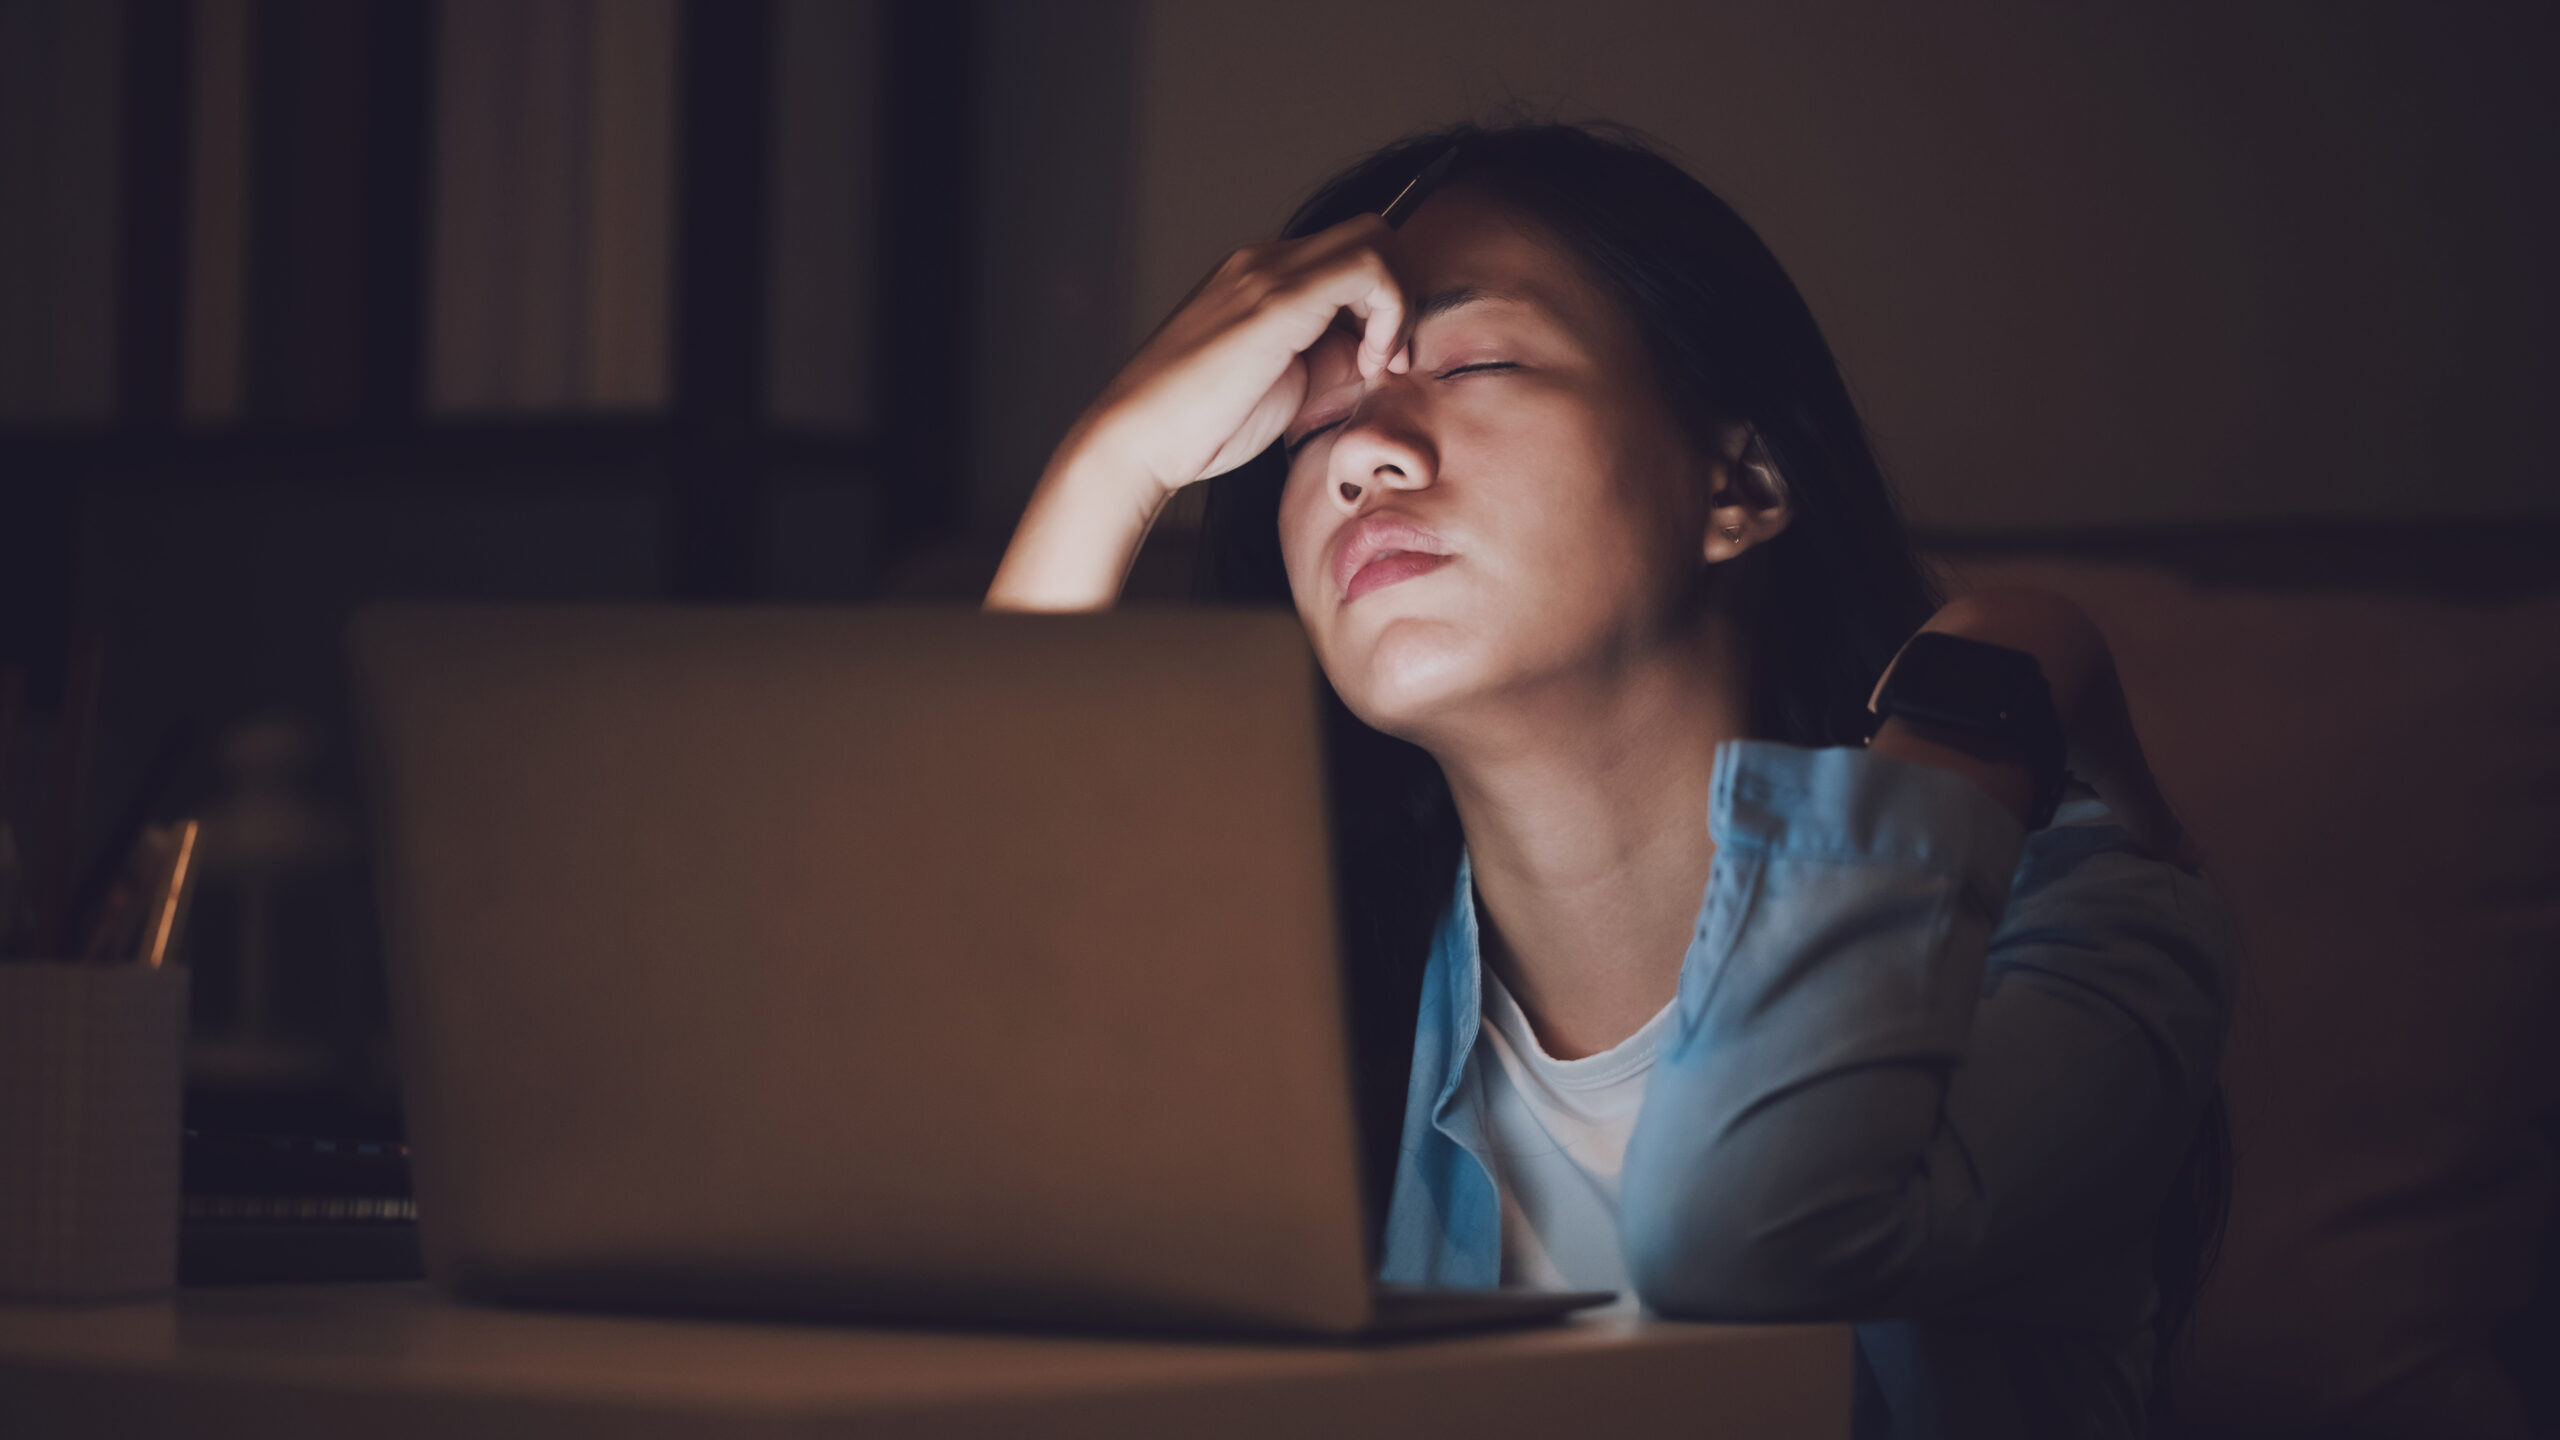 Student feeling stress while studying after hours